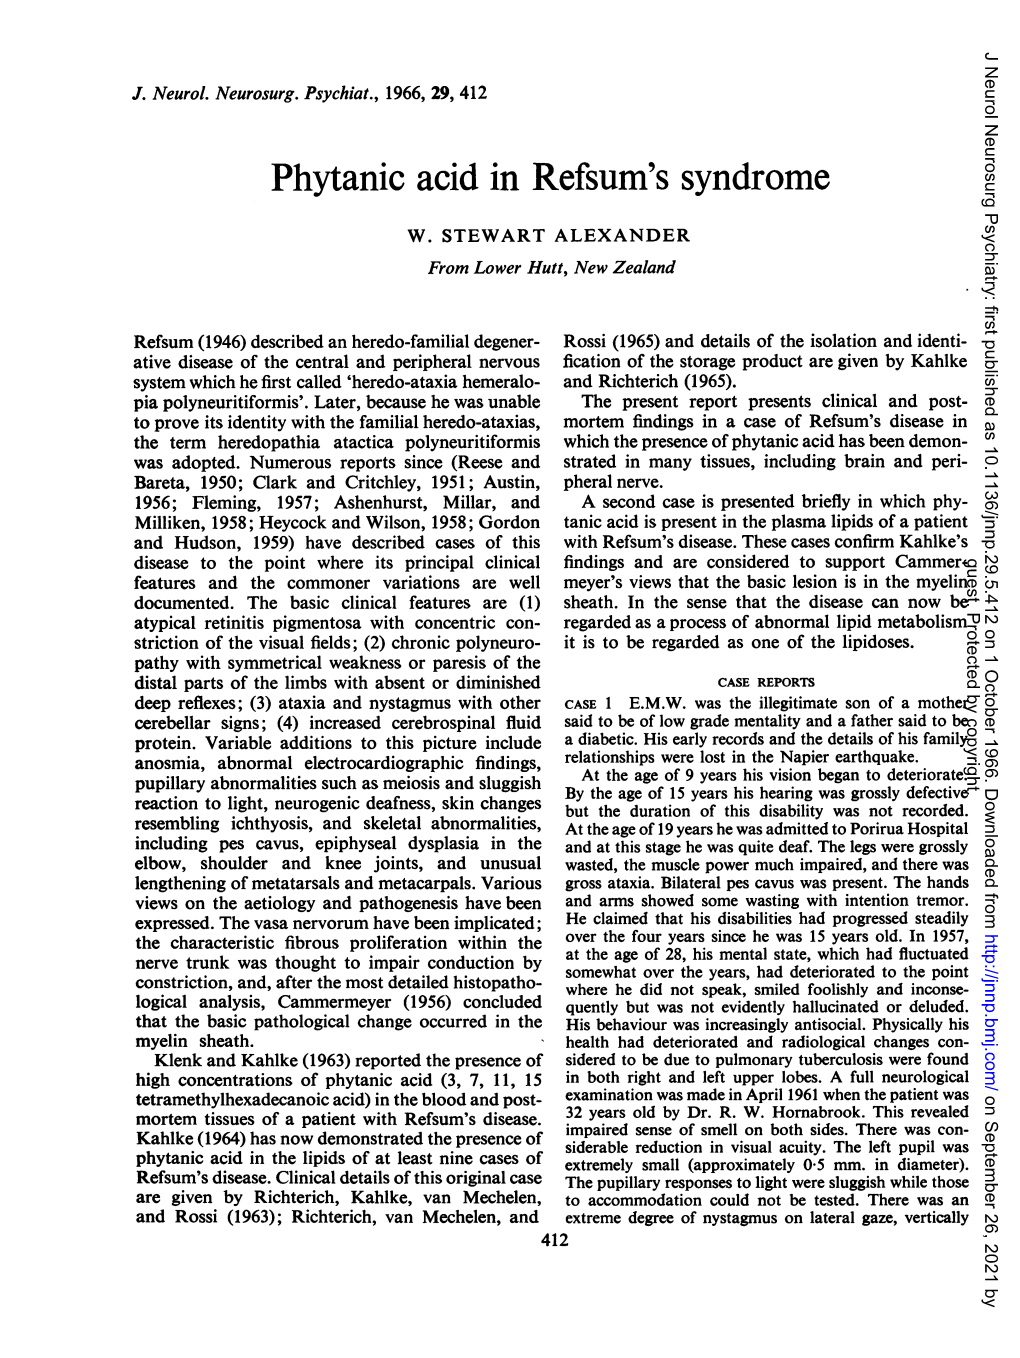 Phytanic Acid in Refsum's Syndrome